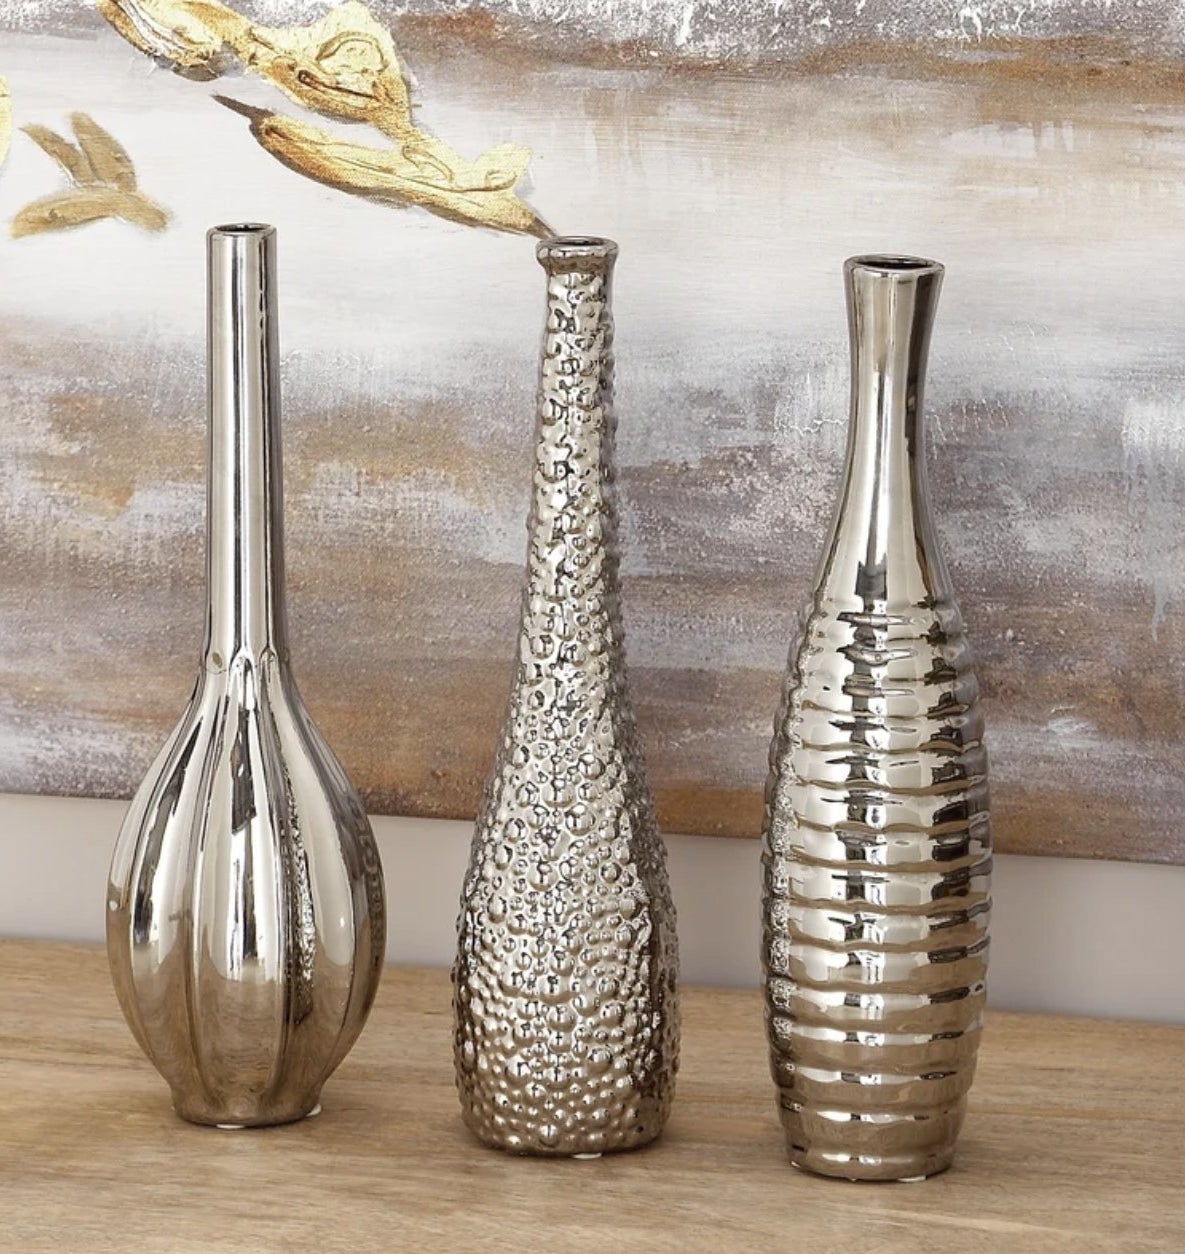 the three silver vases each with a different oblong shape and texture